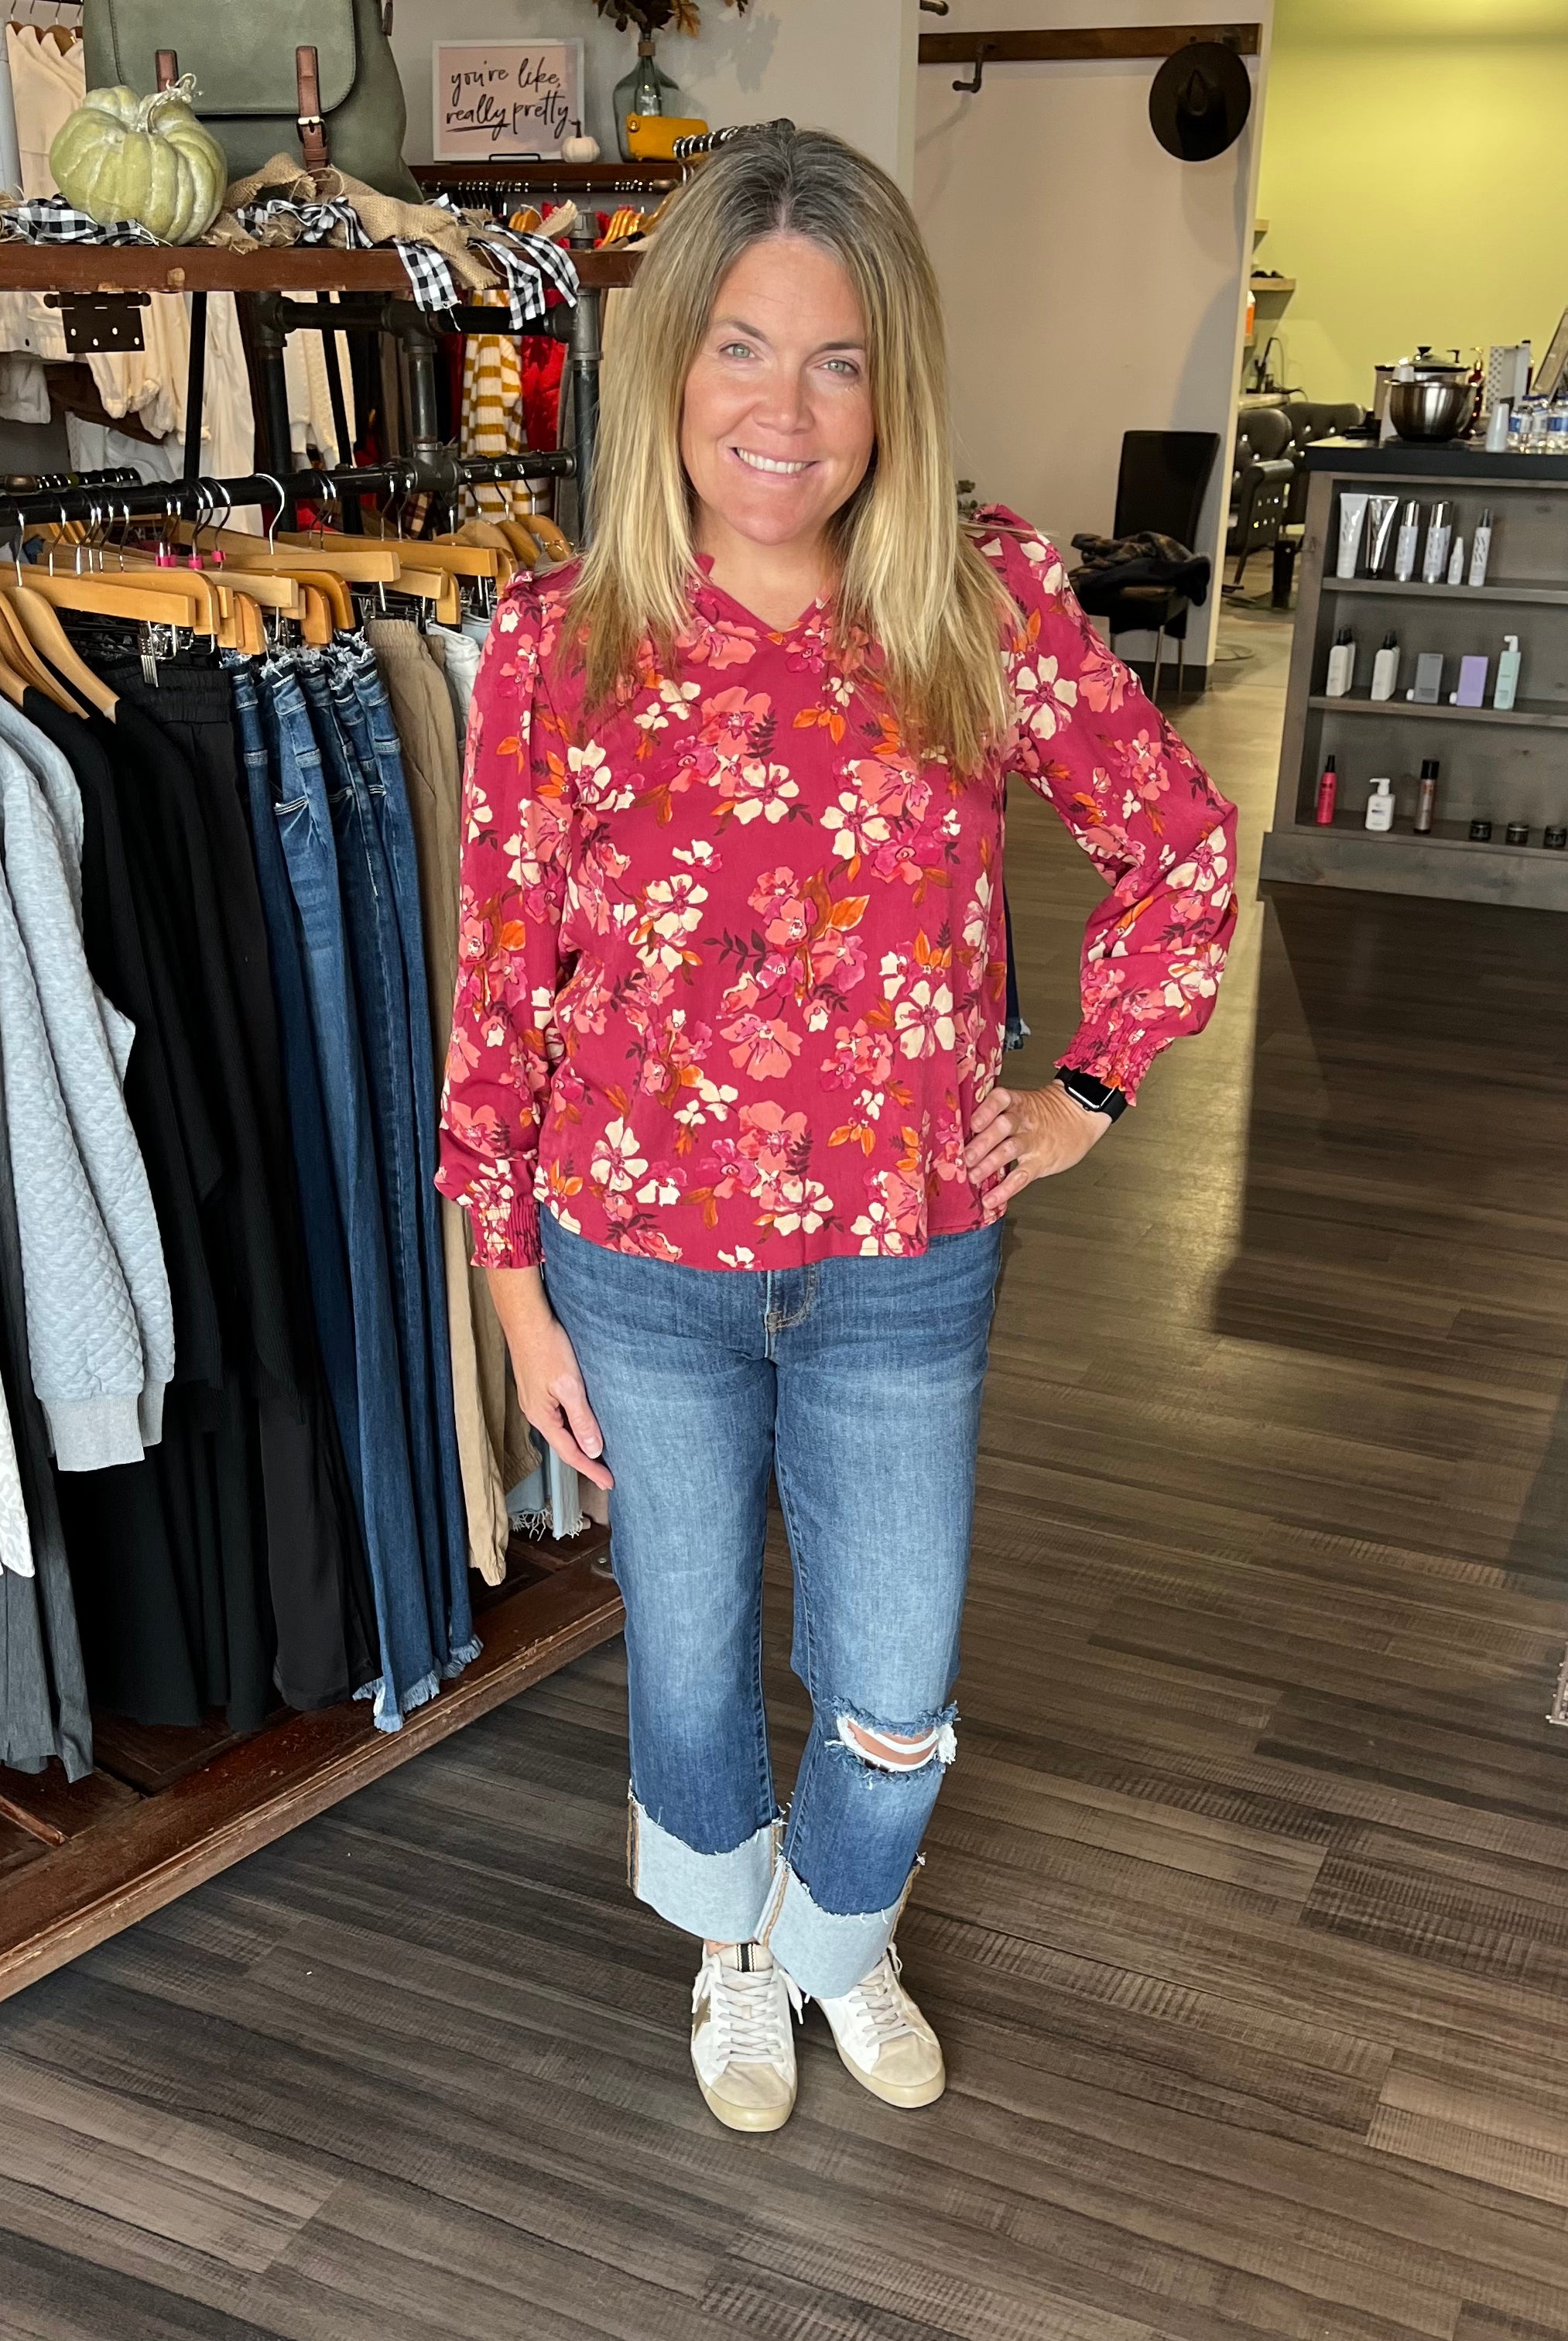 Ashley Floral Top - Burgundy-Long Sleeves-The Funky Zebra Ames-The Funky Zebra Ames, Women's Fashion Boutique in Ames, Iowa